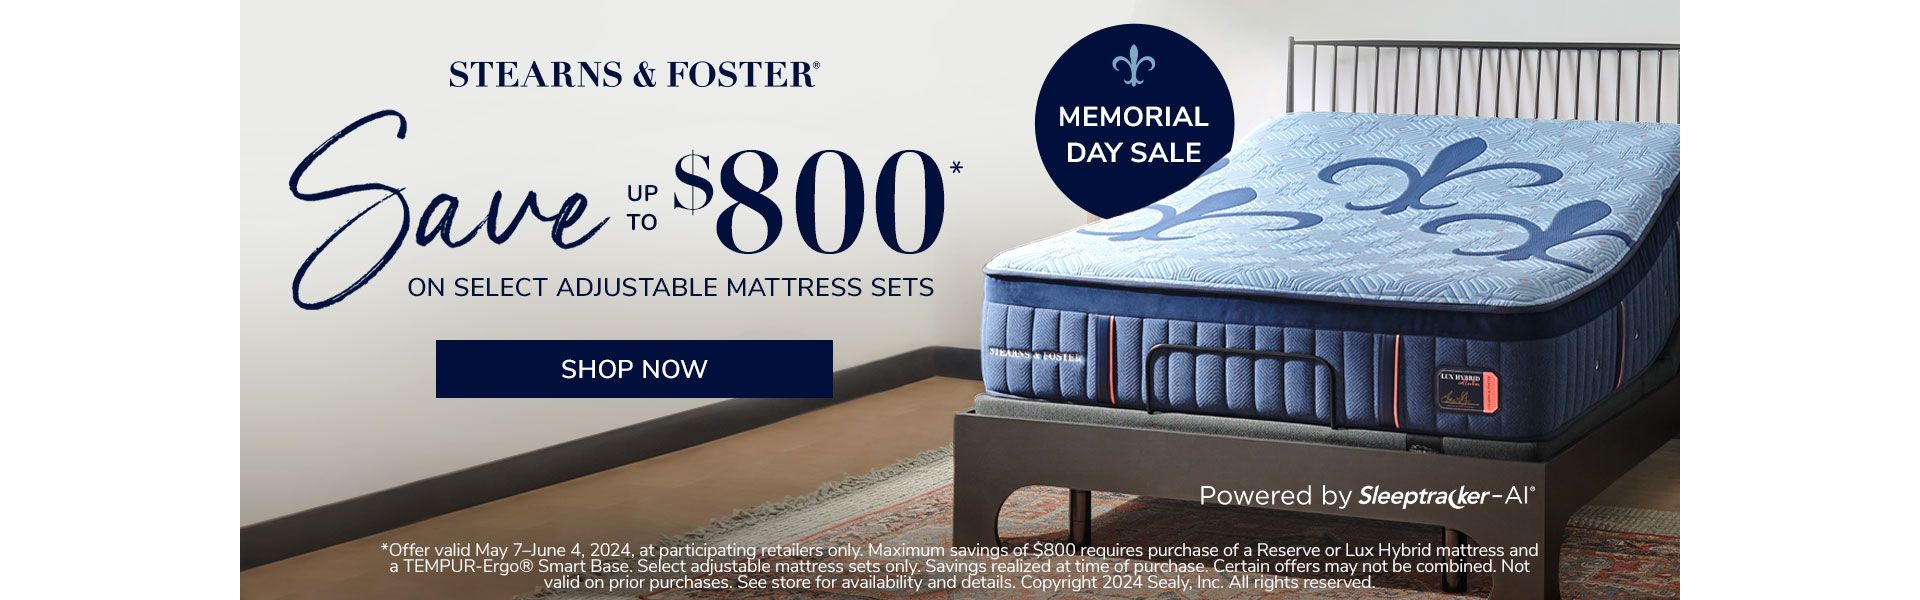 Stearns & Foster. Memorial Day Sale. Save up to $800 on select adjustable mattress sets. Shop Now. *Offer valid May 7–June 4, 2024, at participating retailers only. Maximum savings of $800 requires purchase of a Reserve or Lux Hybrid mattress and a TEMPUR-Ergo® Smart Base. Select adjustable mattress sets only. Savings realized at time of purchase. Certain offers may not be combined. Not valid on prior purchases. See store for availability and details. Copyright 2024 Sealy, Inc. All rights reserved. 